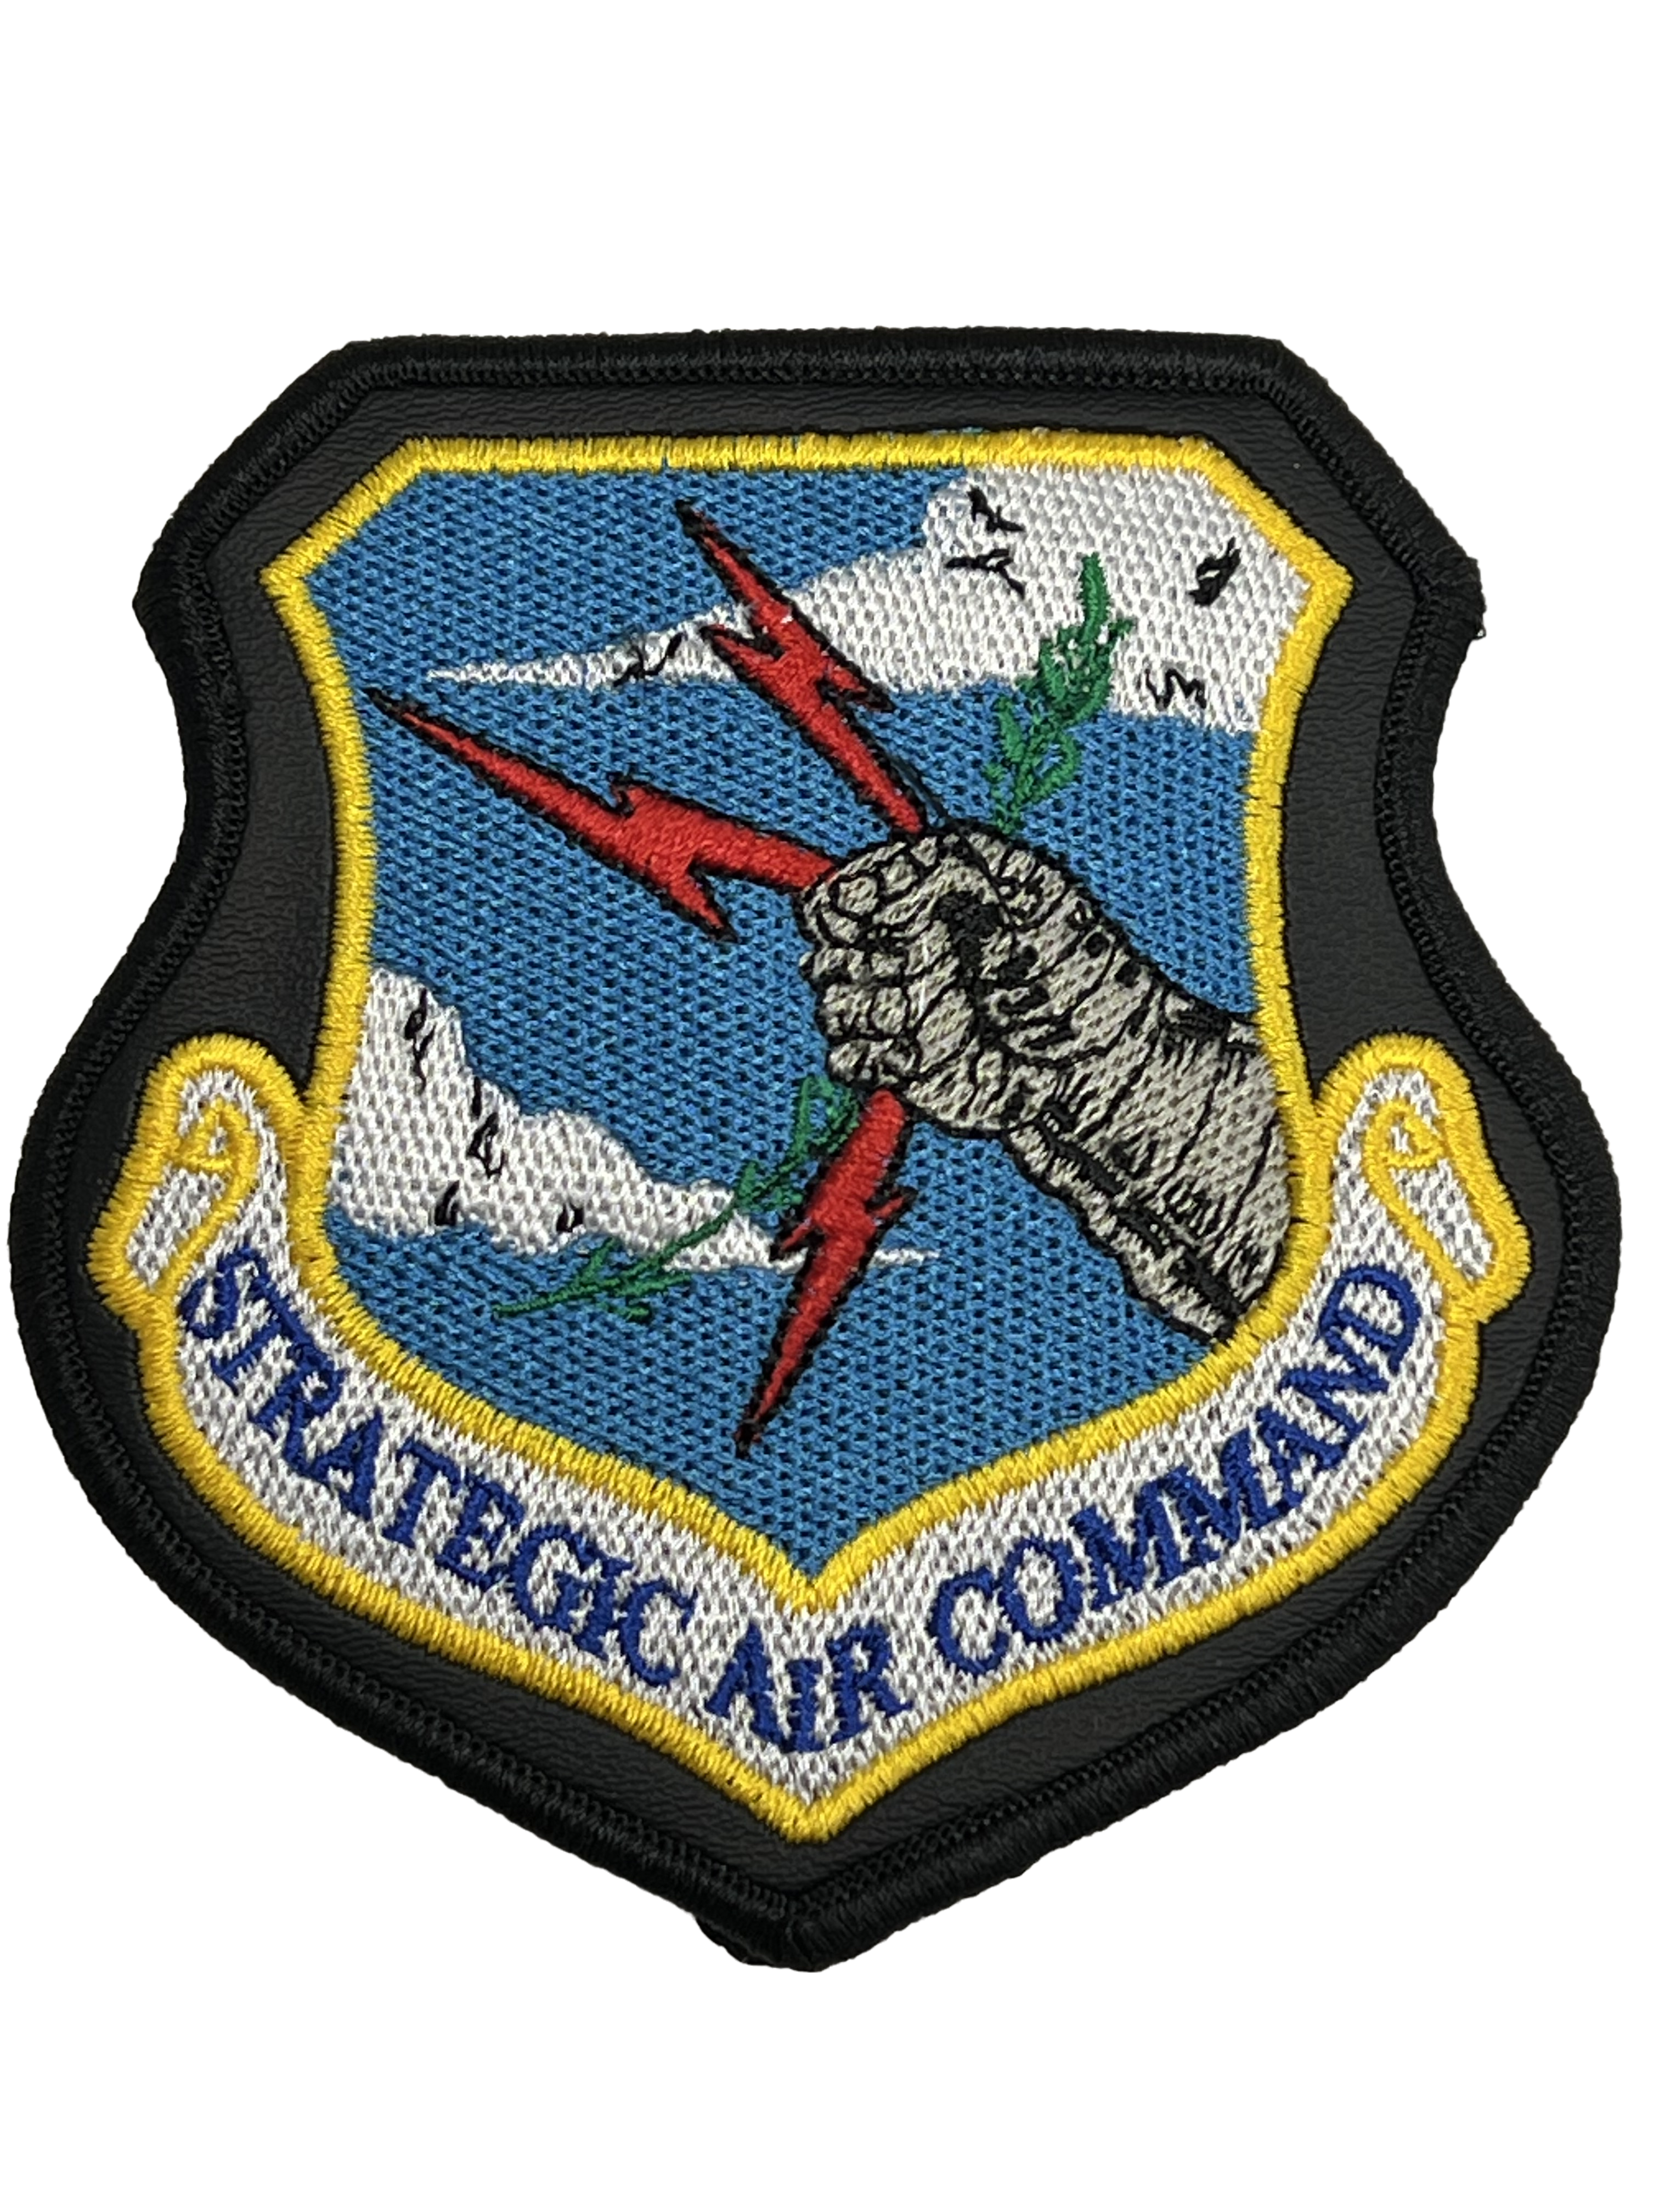 Strategic Air Command - A2 Patch (leather jacket) - COLOR